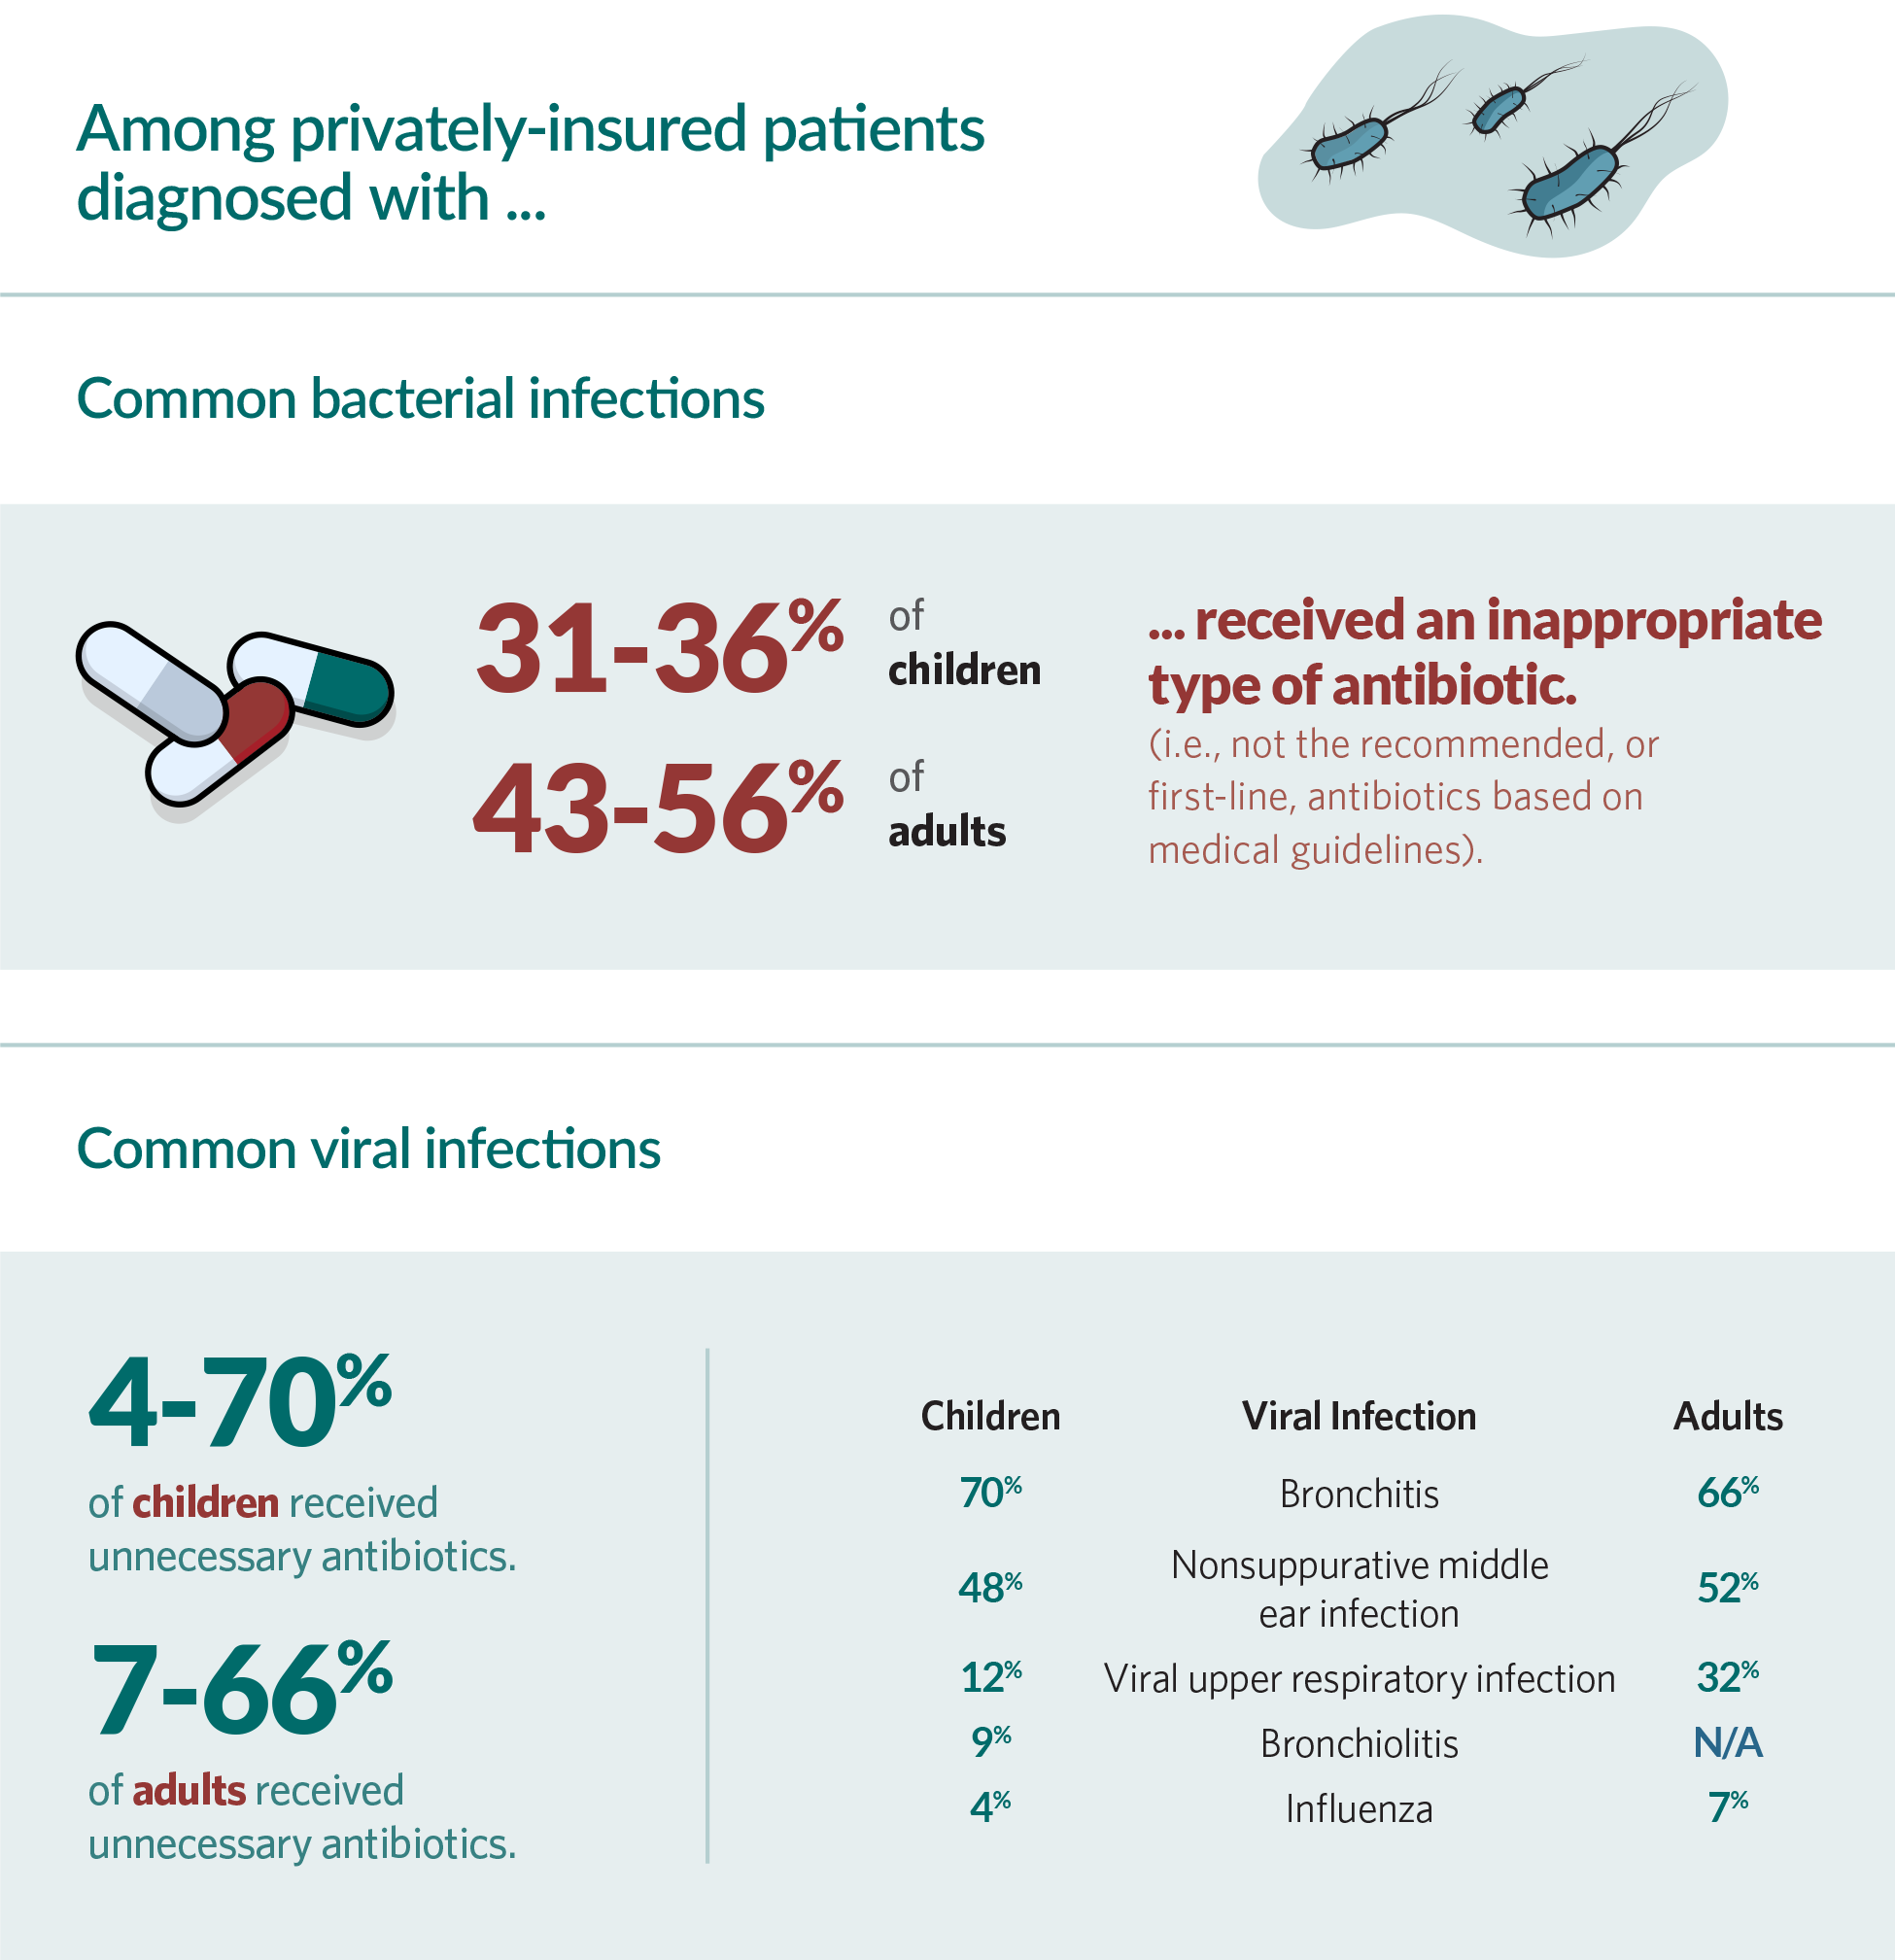 Among privately-insured patients diagnosed with Common bacterial infections 31%-36% of children ... received an inappropriate type of antibiotic. (i.e., not the recommended, or first-line, antibiotics based on medical guidelines). 43%–56% of adults  ... received an inappropriate type of antibiotic. (i.e., not the recommended, or first-line, antibiotics based on medical guidelines)…Common viral infections 4%–70% of children received unnecessary antibiotics:  Bronchitis: 70%, Nonsuppurative middle ear infection: 48%, Viral upper respiratory infection: 12%, Bronchiolitis: 9%, Influenza: 4%. 7%–66% of adults received unnecessary antibiotics: Bronchitis: 66%, Nonsuppurative middle ear infection: 52%, Viral upper respiratory infection: 32%, Bronchiolitis: N/A, Influenza: 7%